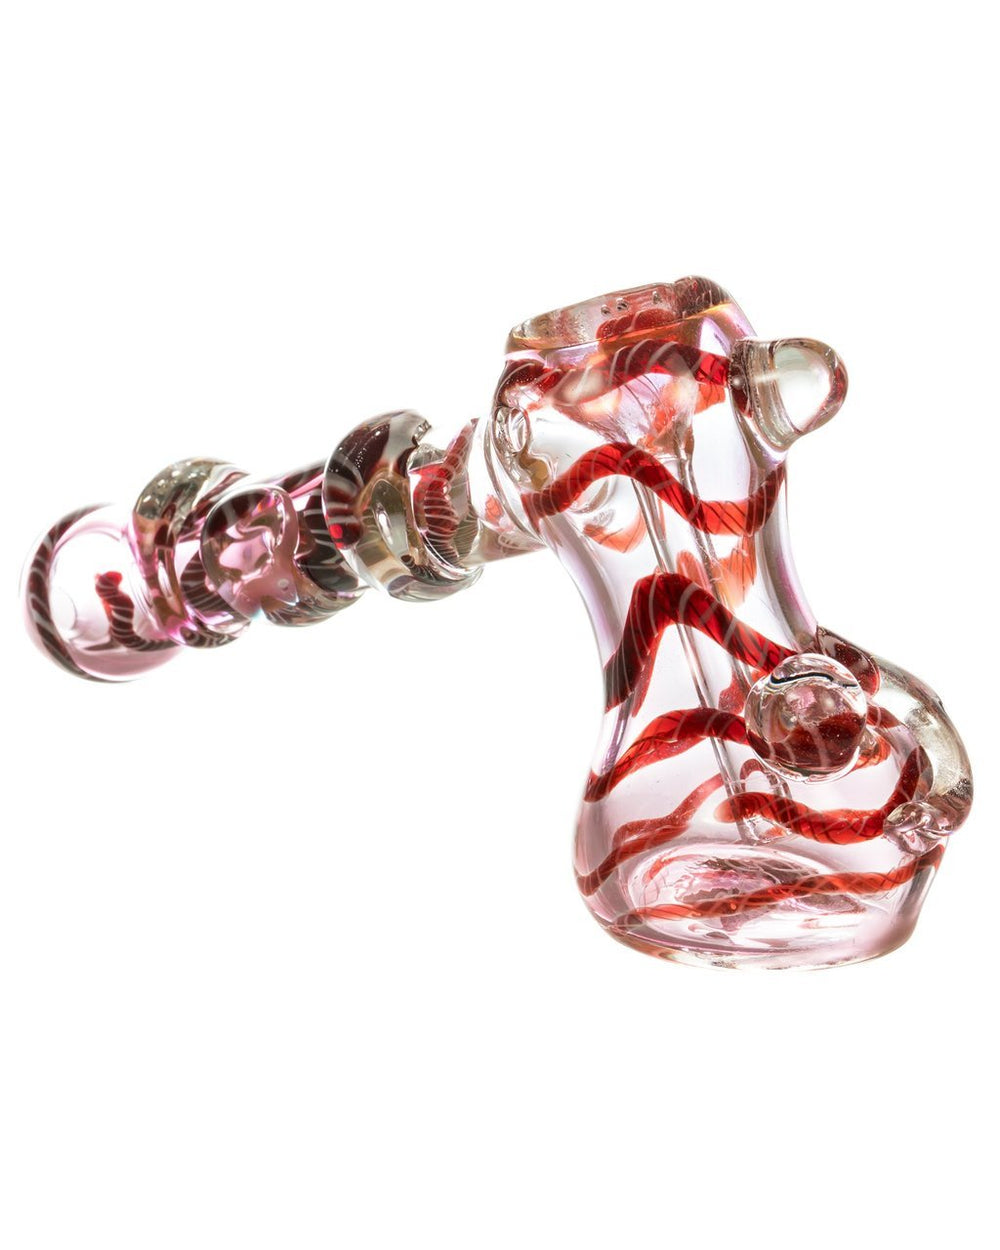 Bubblers BoroDirect - Hammer Style Bubbler with Glass Drop Accents